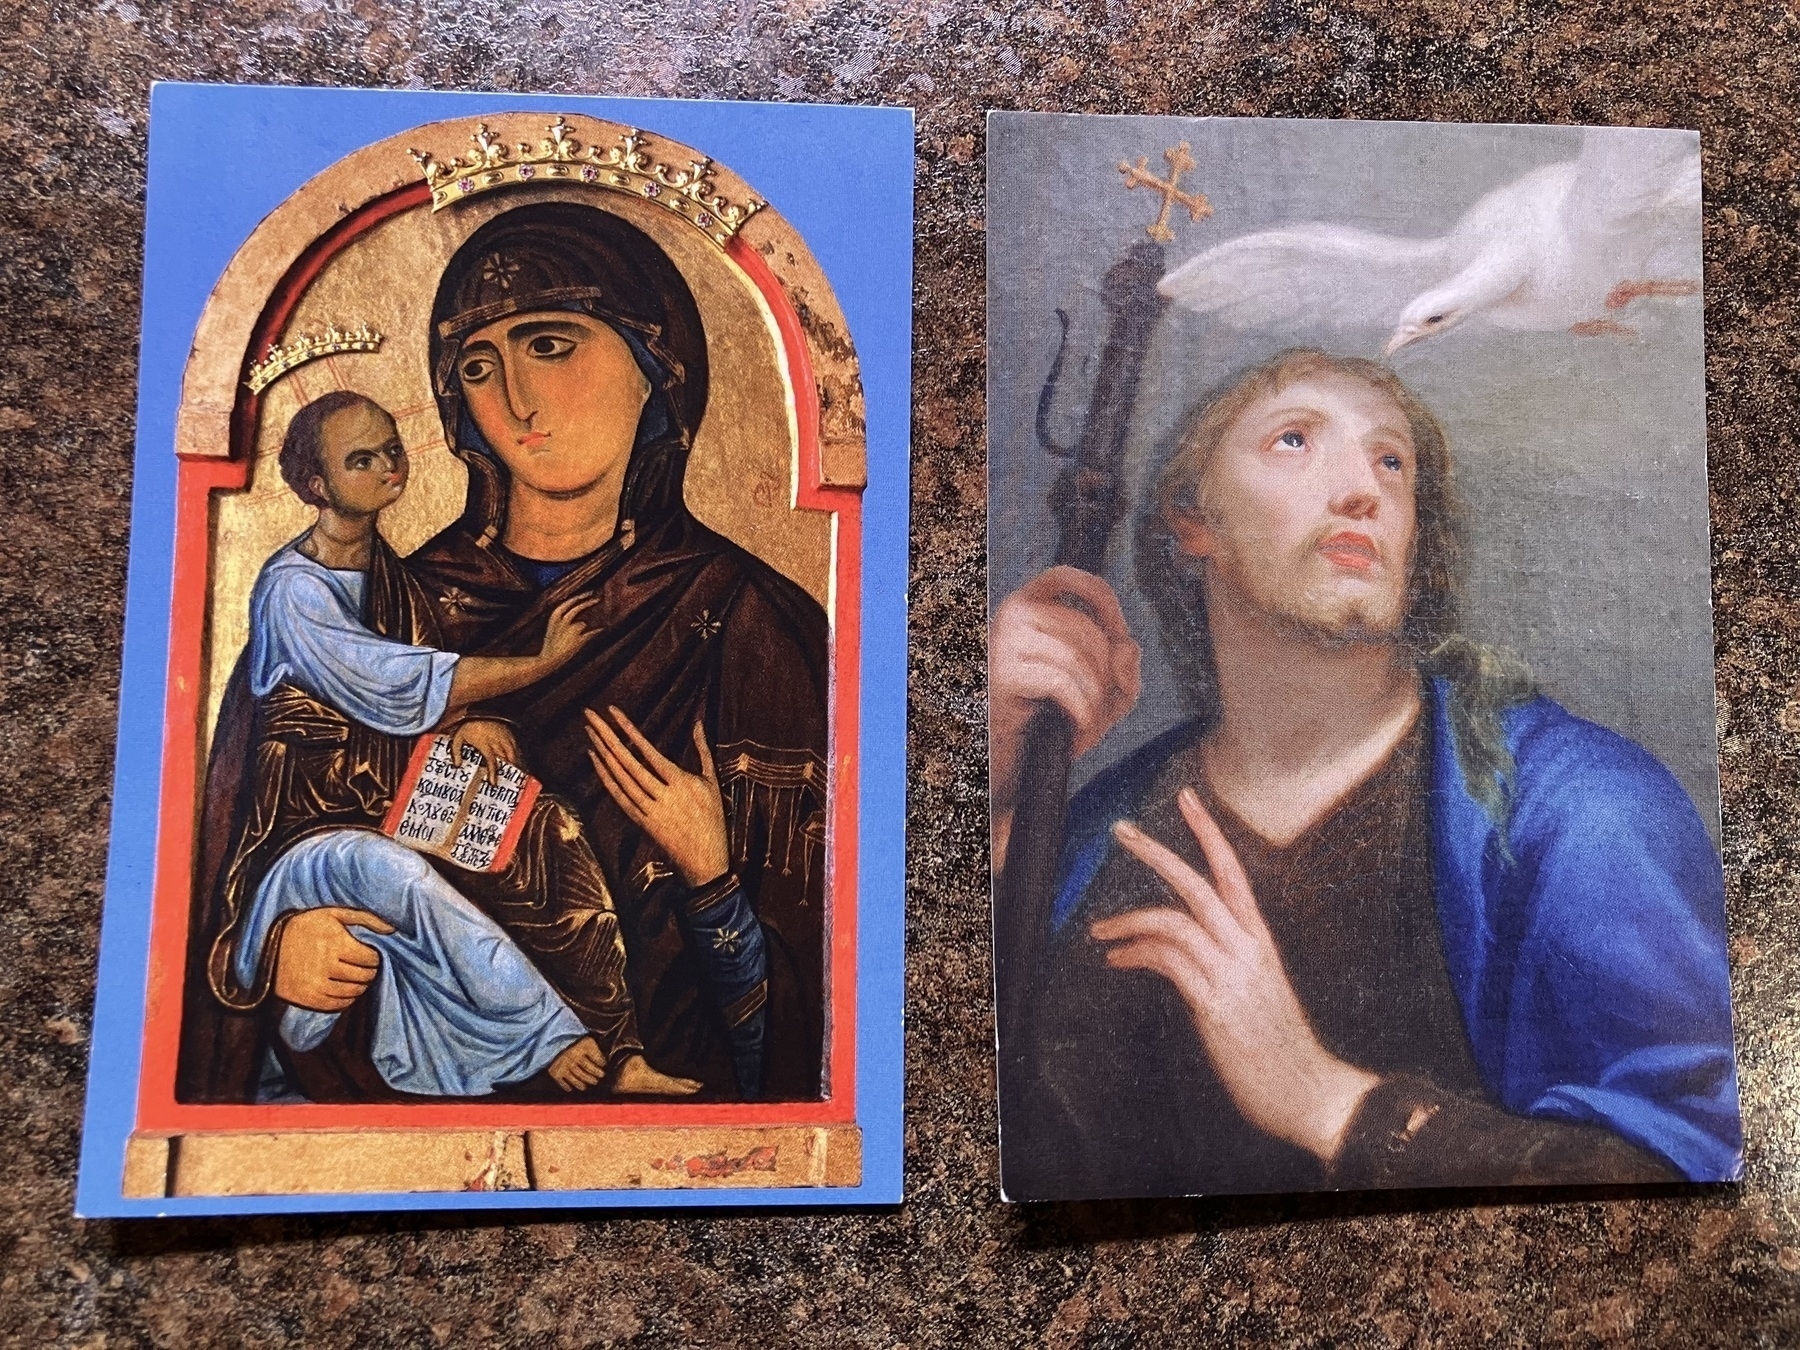 Auto-generated description: The image shows two religious artworks: one depicts the Virgin Mary holding baby Jesus, both crowned, and the other features a saint-like figure with a dove near their head.